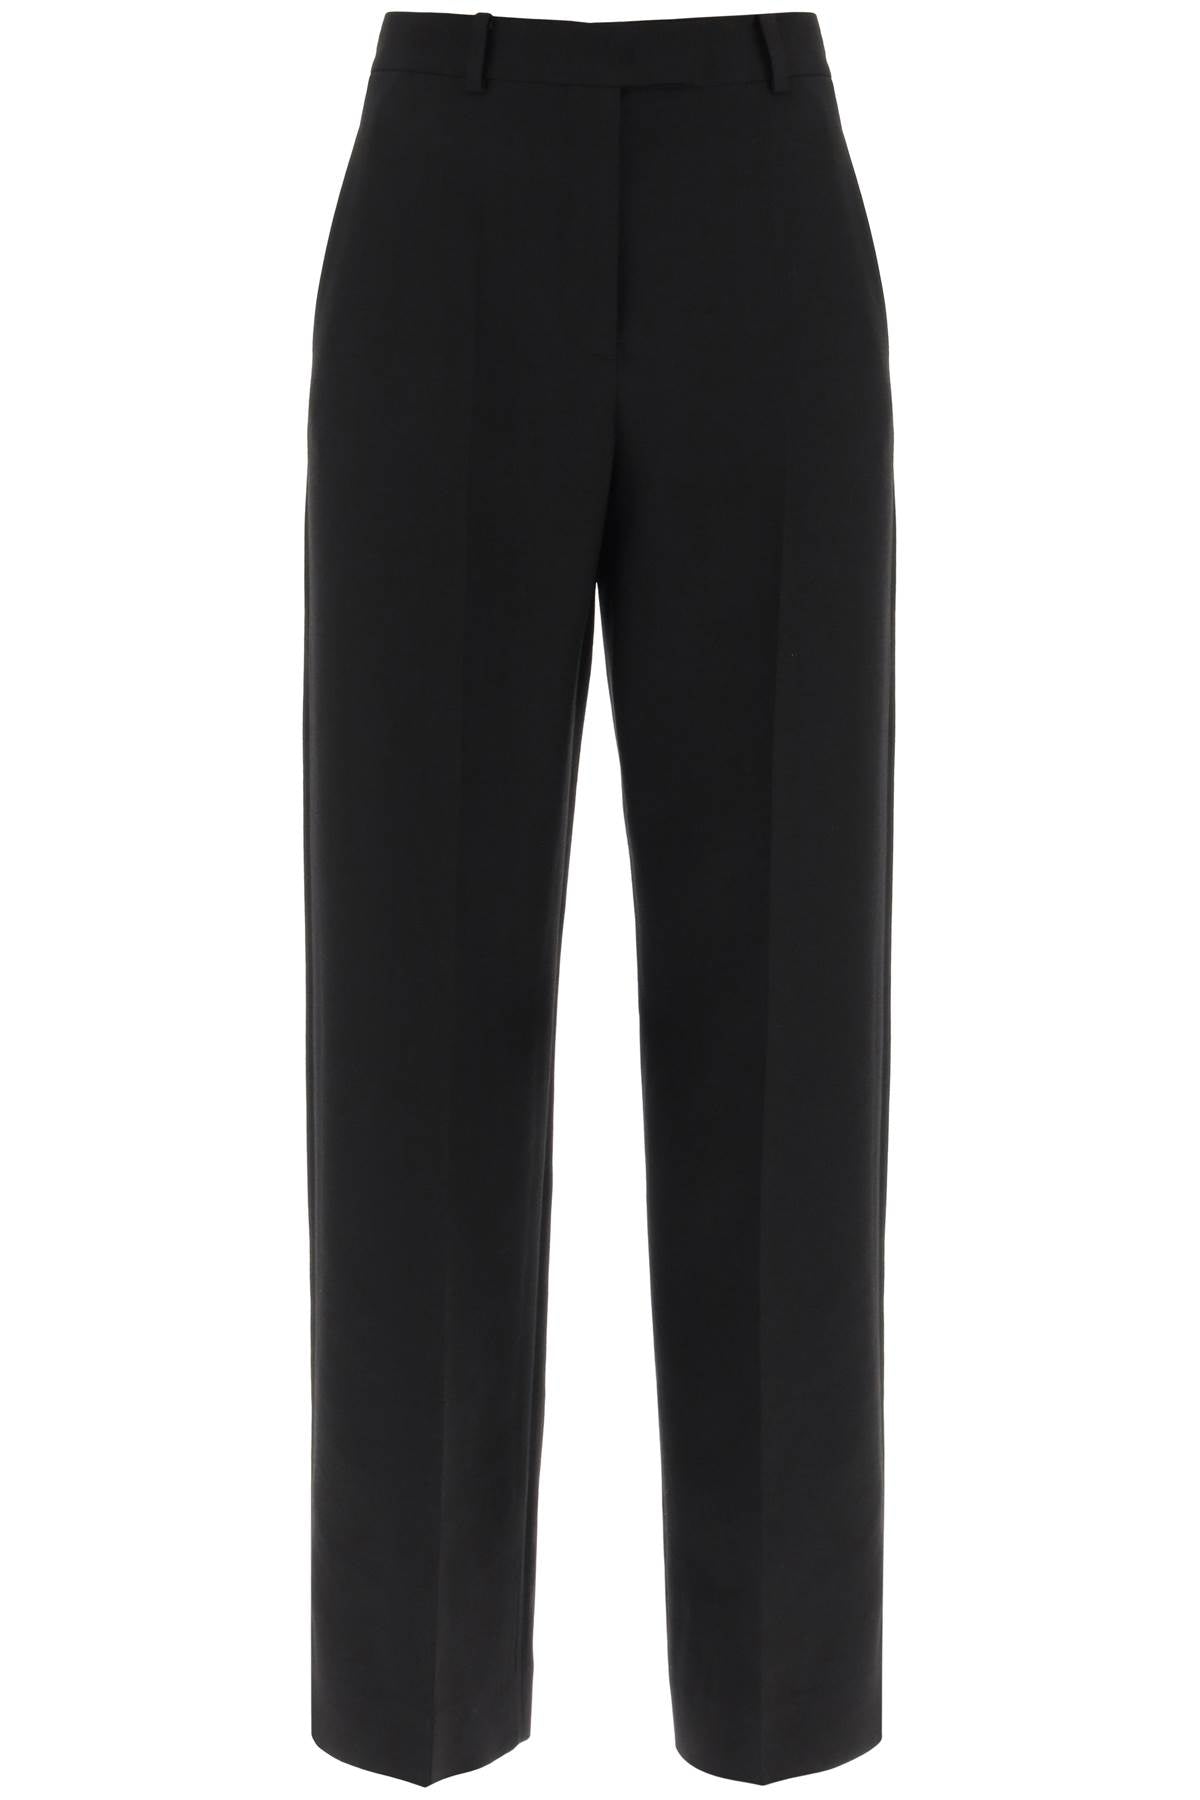 VALENTINO GARAVANI Sophisticated Black Crepe Couture Pants for Women - FW23 Collection